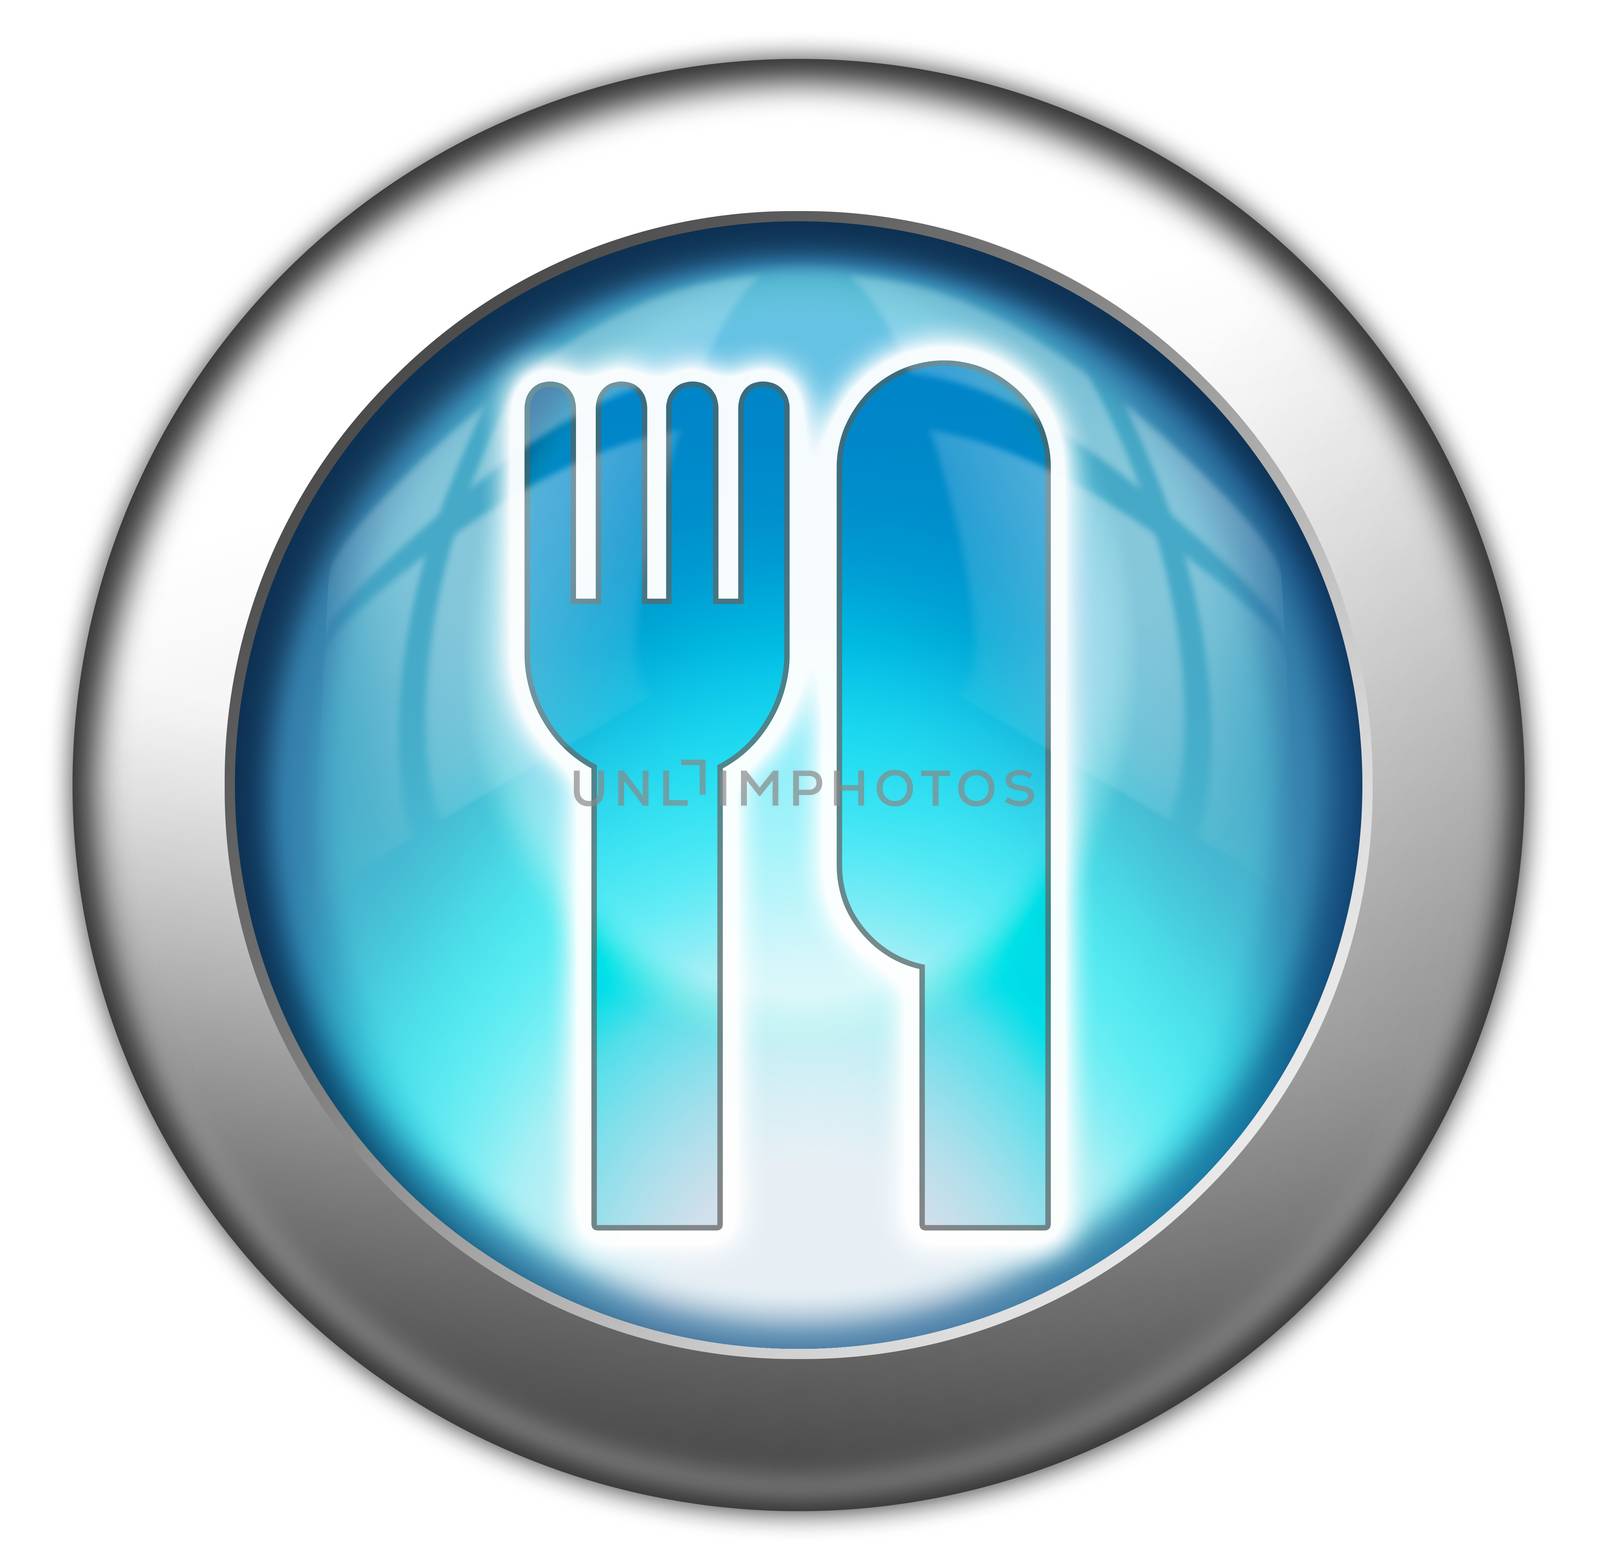 Icon, Button, Pictogram with -Eatery, Restaurant- symbol